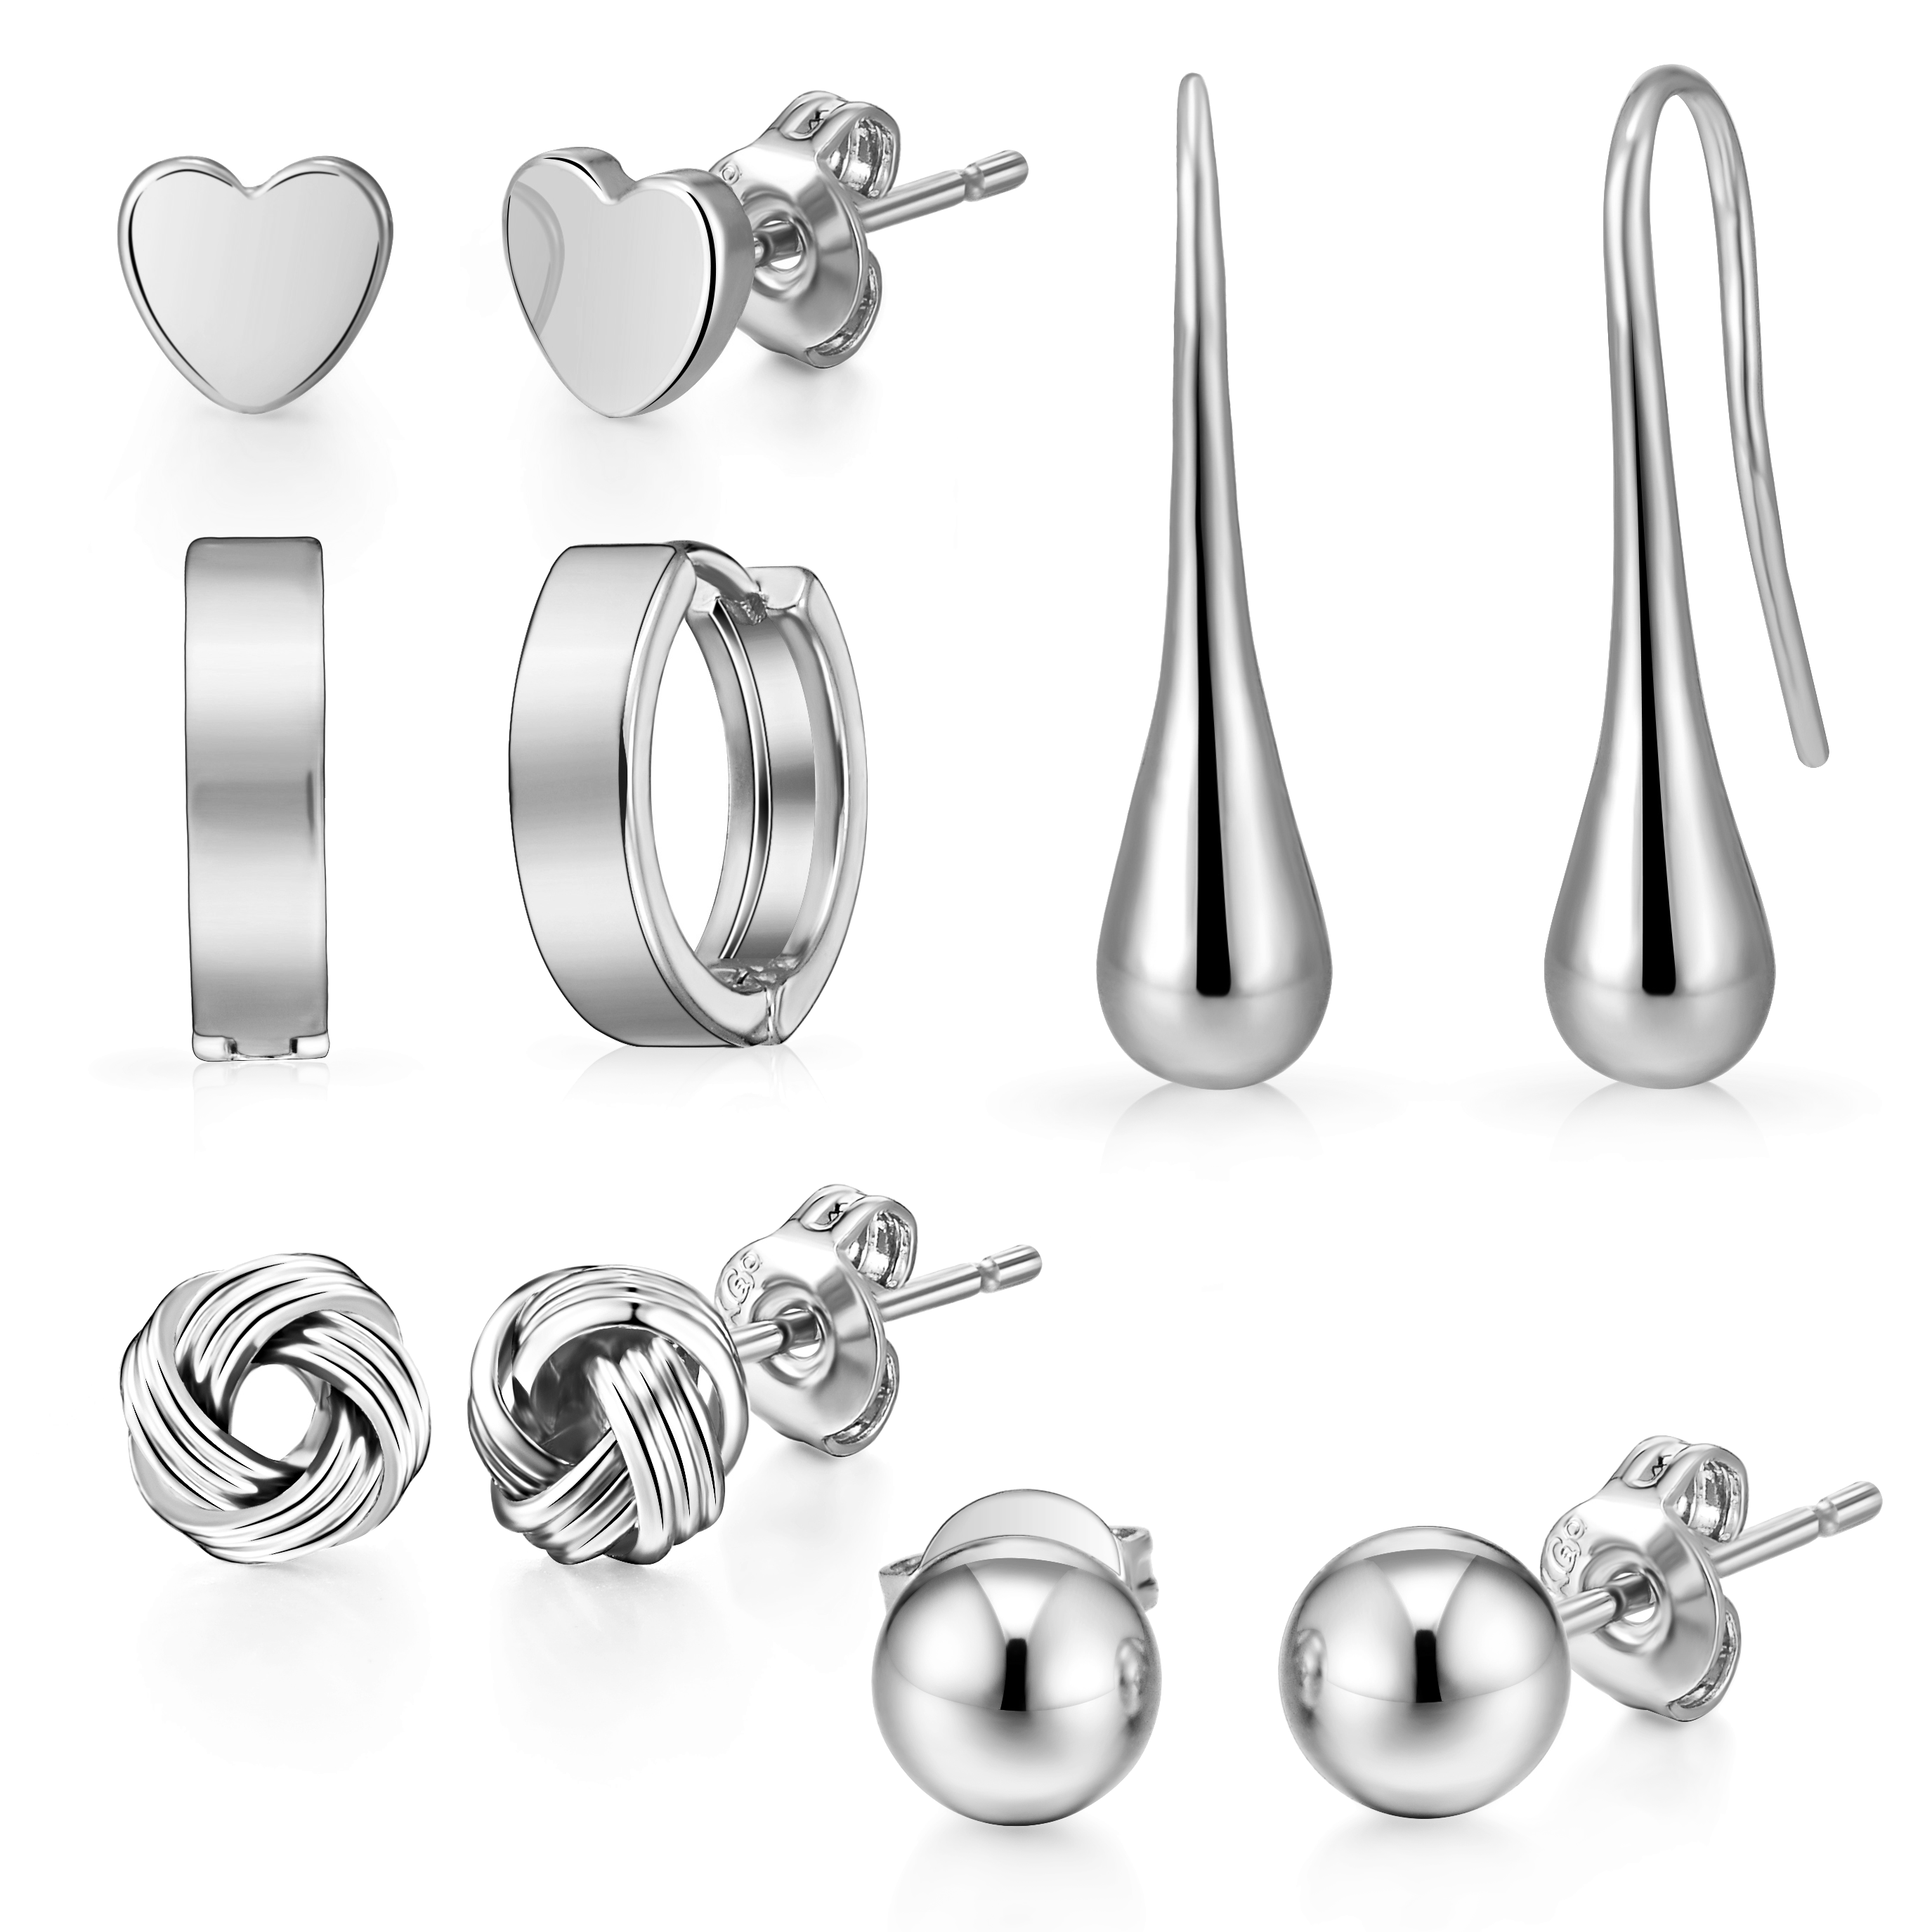 5 Pairs of Silver Plated Plated Earrings